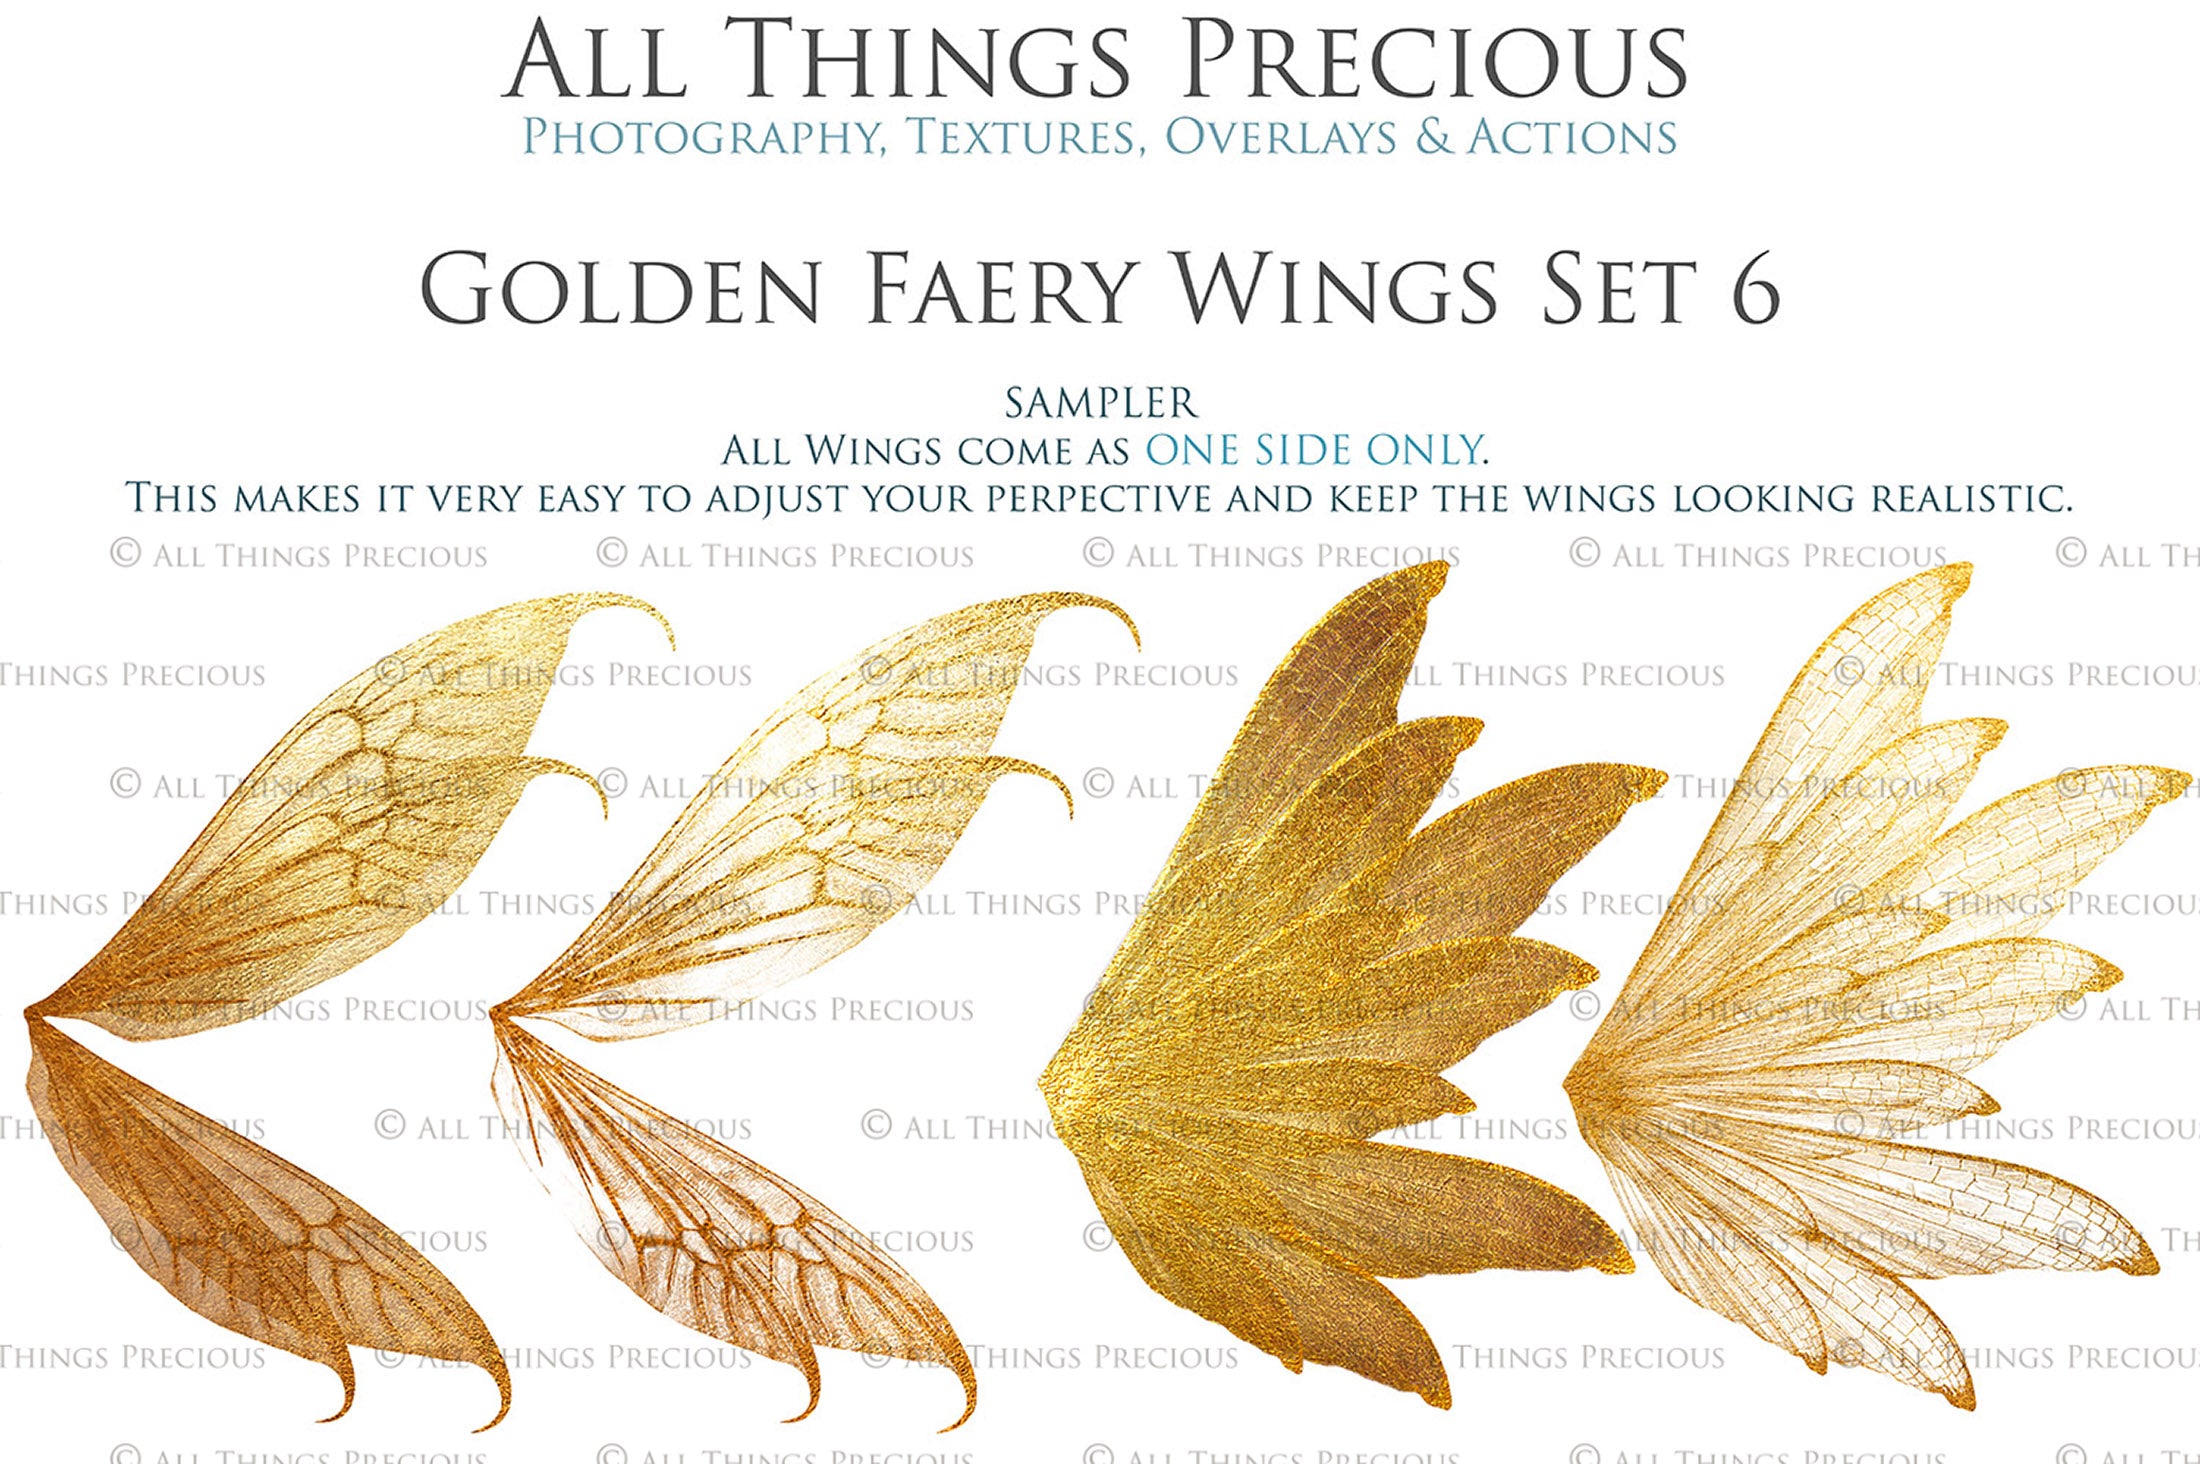 Golden fairy wings, Png overlays for photoshop. High resolution transparent, see through wings. Fairycore, Cosplay, Photographers, Photoshop Edits, Digital overlay for photography. Digital stock and resources. Graphic design. Colourful, Gold, Fantasy Wing Bundle. Assets for Fine Art design. By ATP Textures